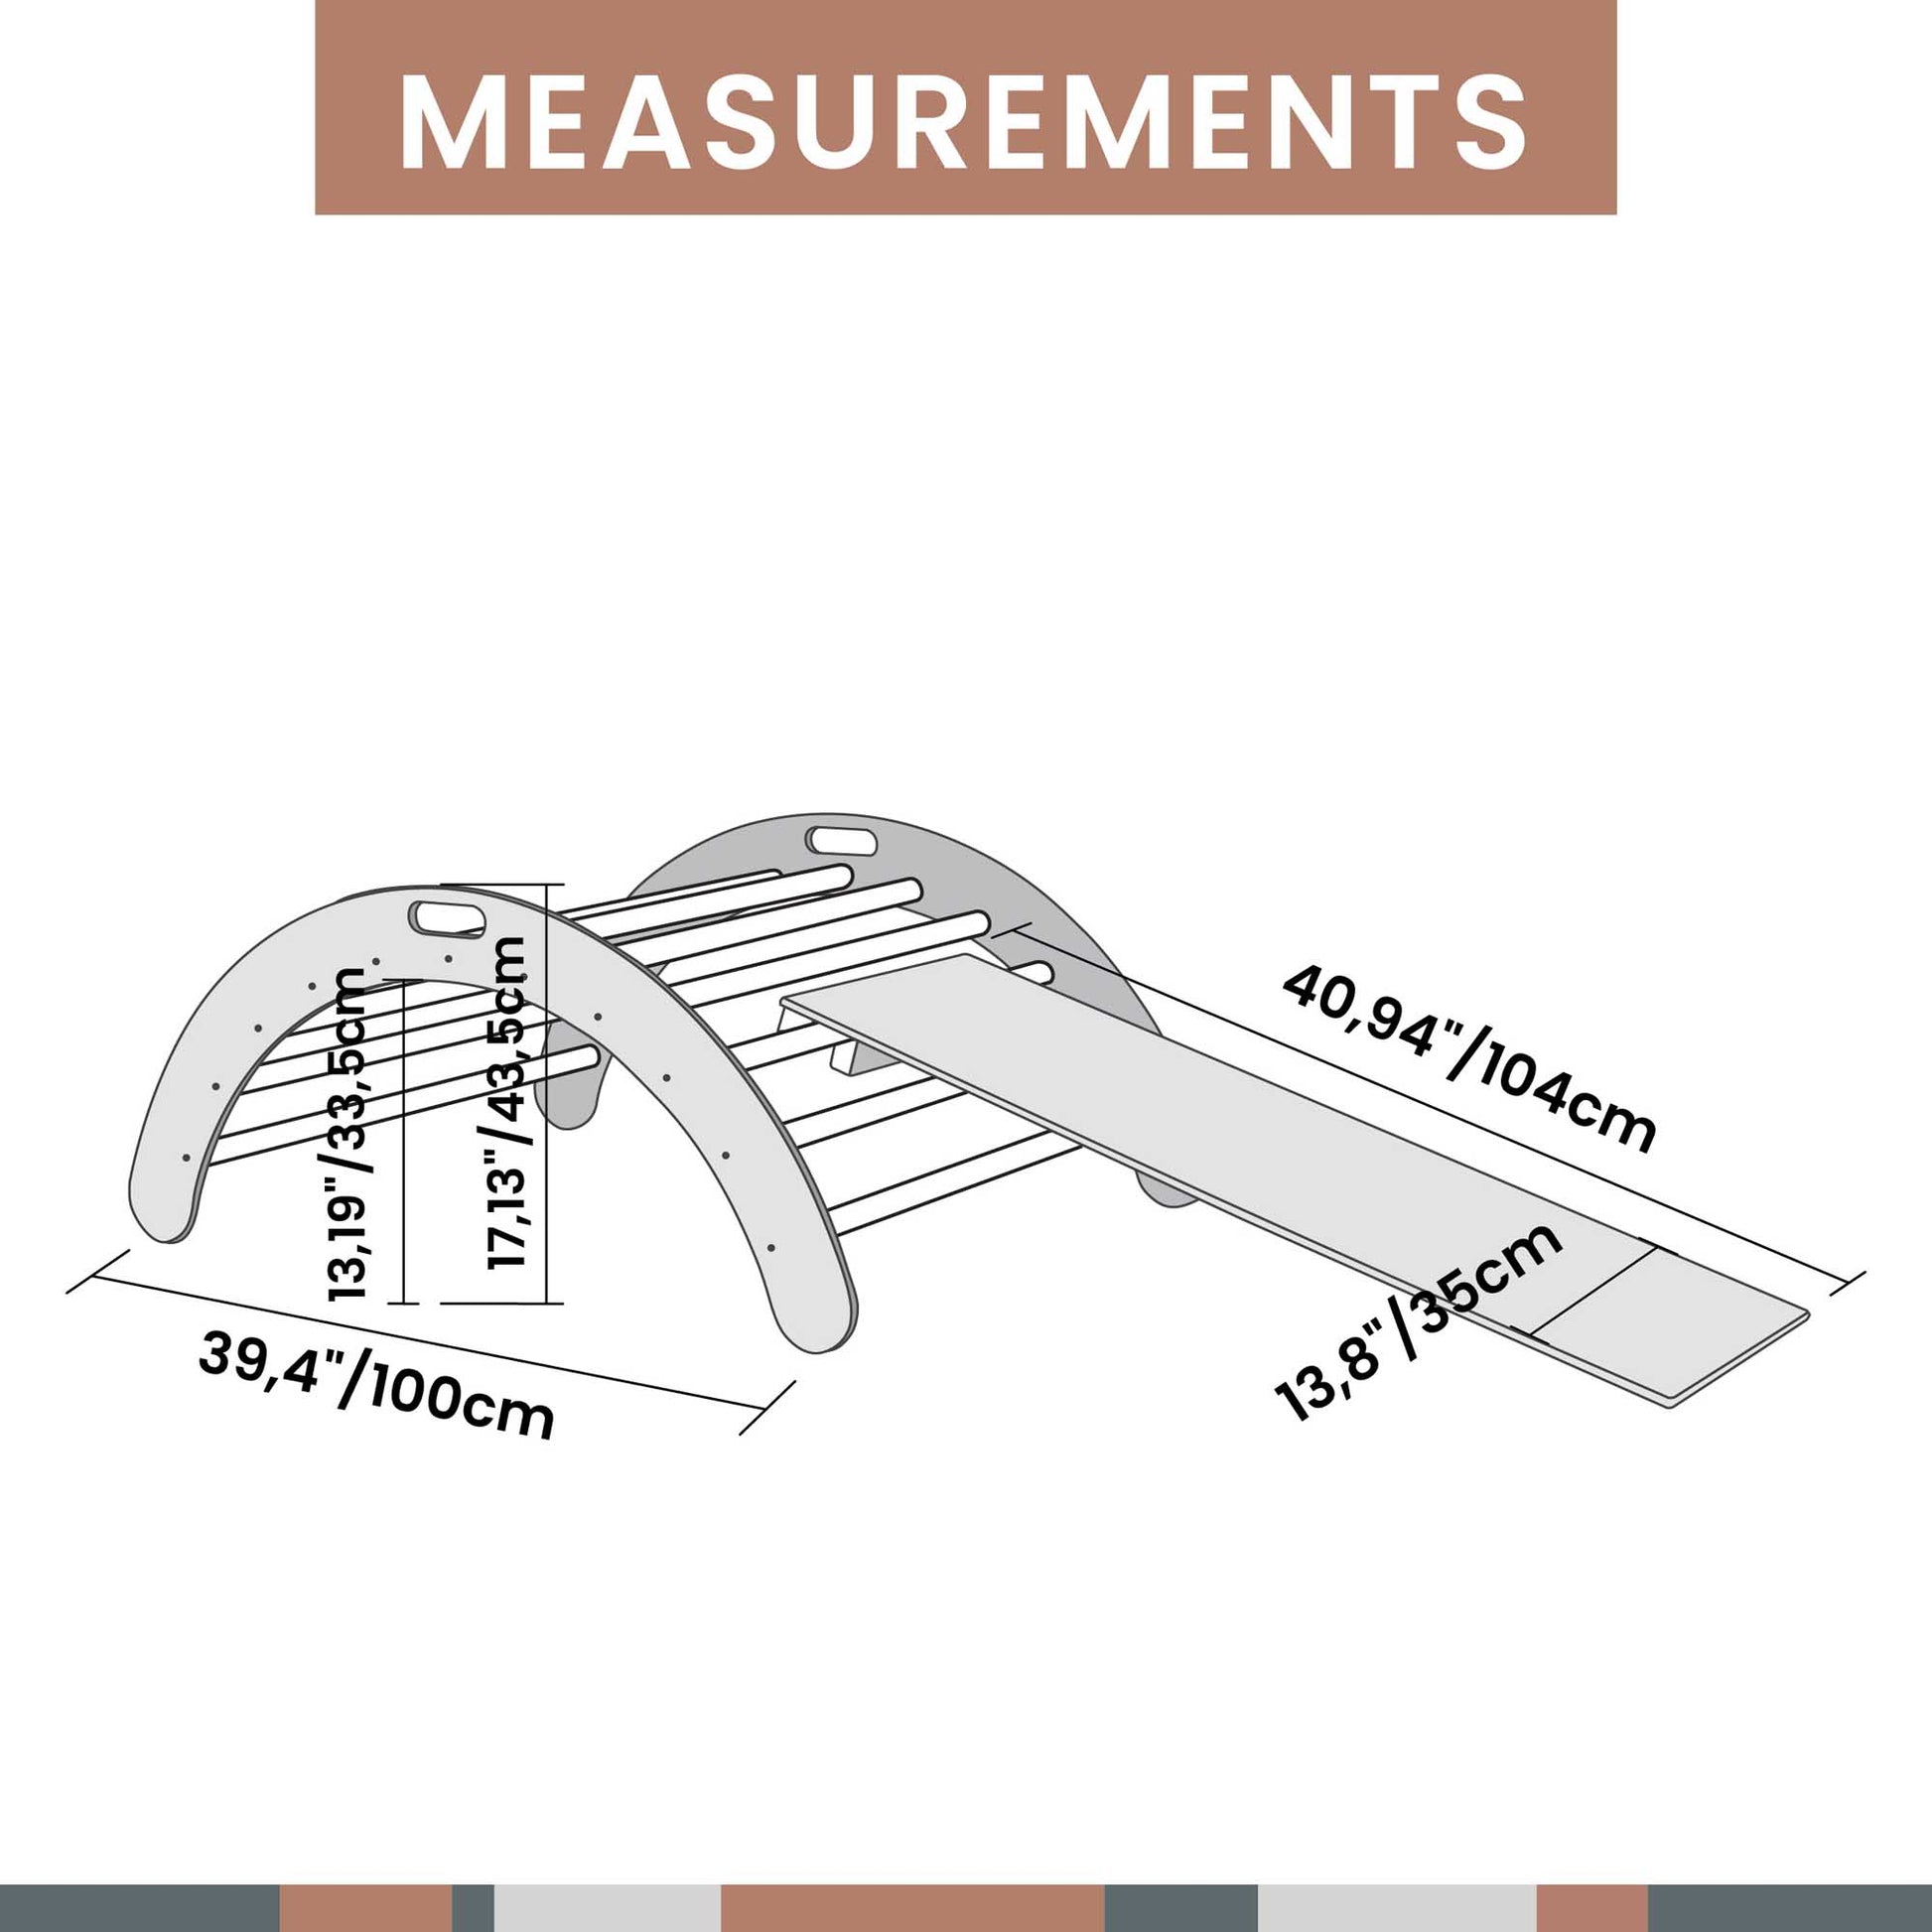 A diagram displaying the measurements of a Climbing arch + Transformable climbing triangle + a ramp wooden swing.